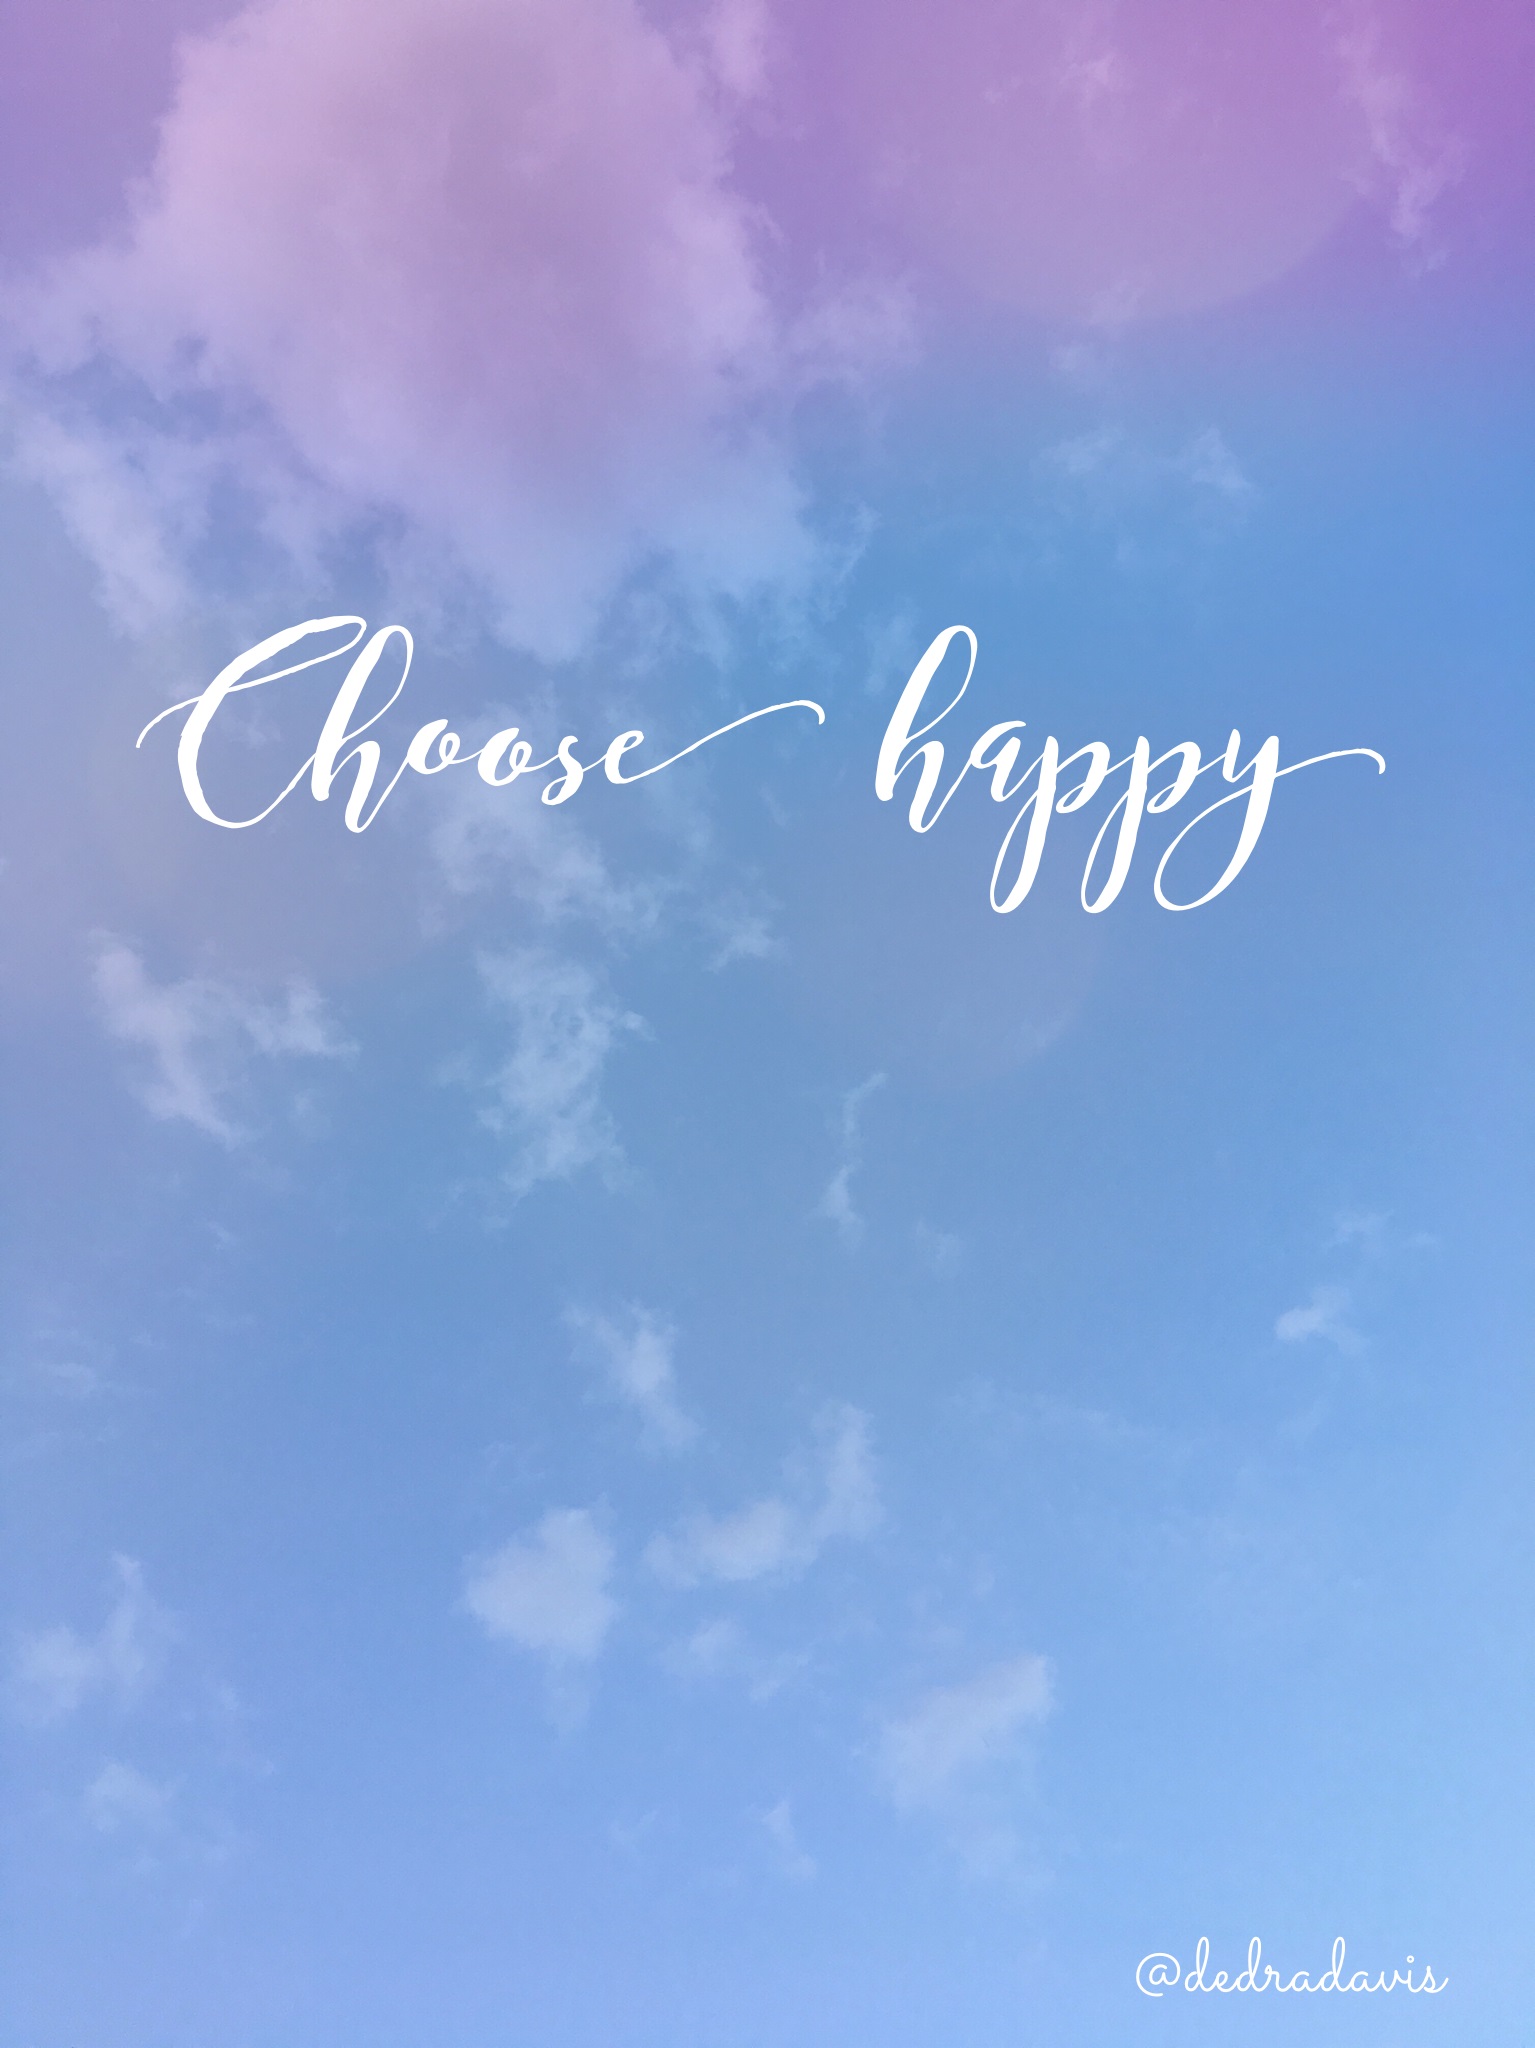 Being grateful and choosing happy; two qualities that can help you make it through difficult times